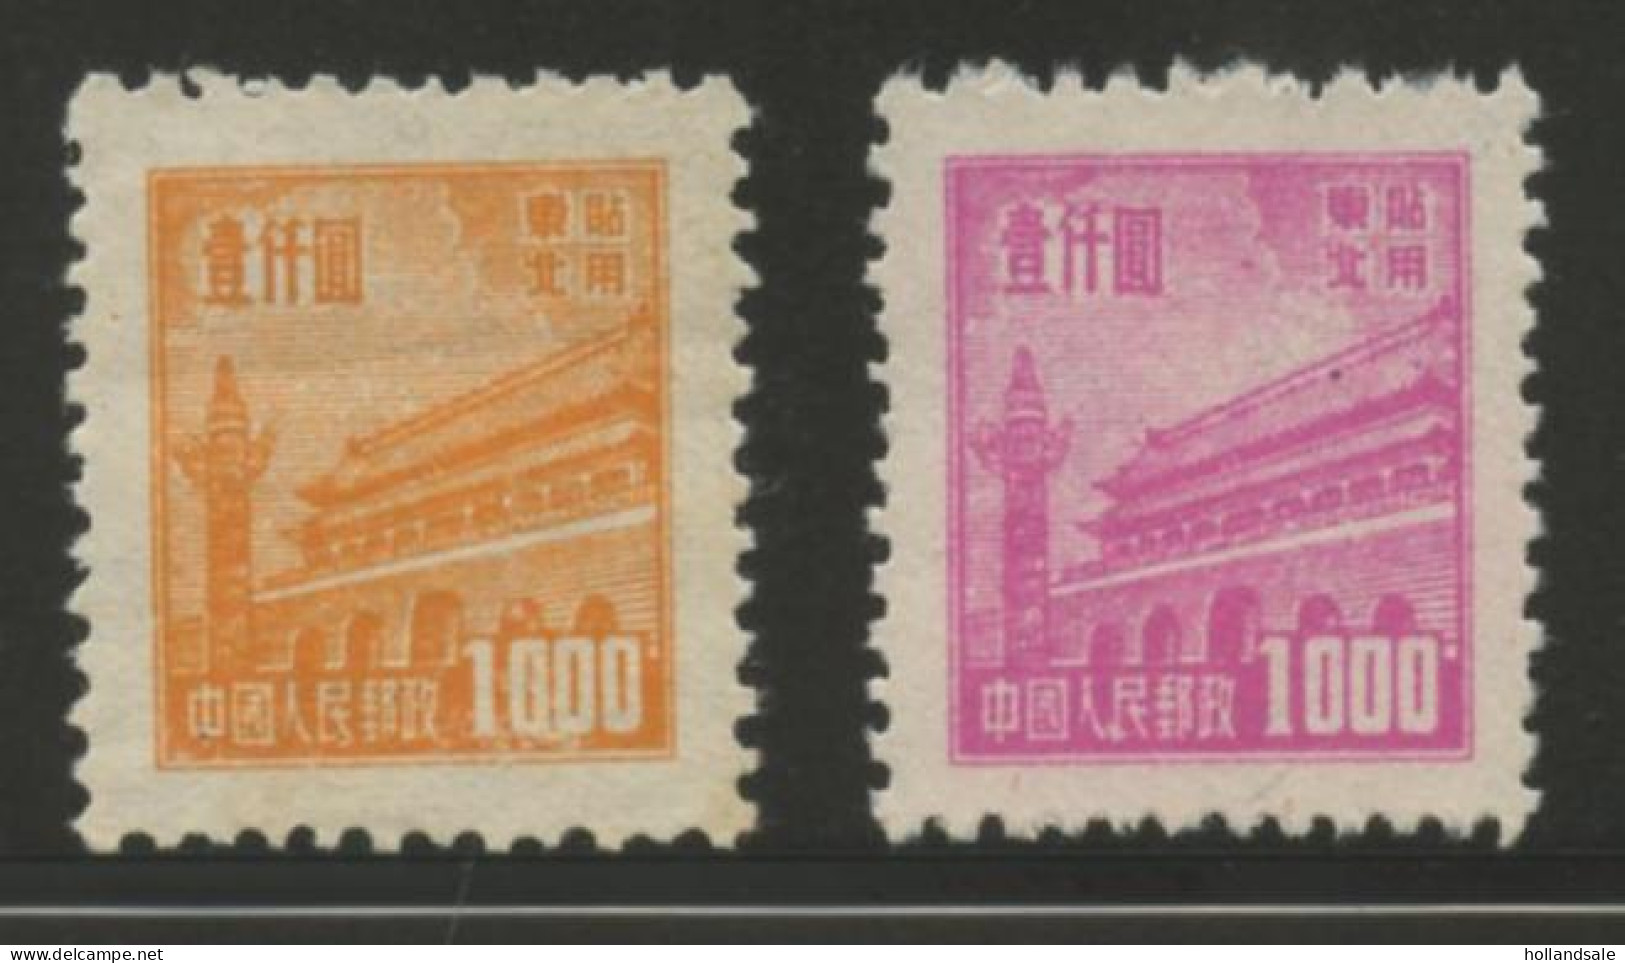 CHINA NORTH EAST - 1950 2x $1000 Tien An Men Stamps From RN1. Unused. MICHEL # 163-164. - Chine Du Nord-Est 1946-48